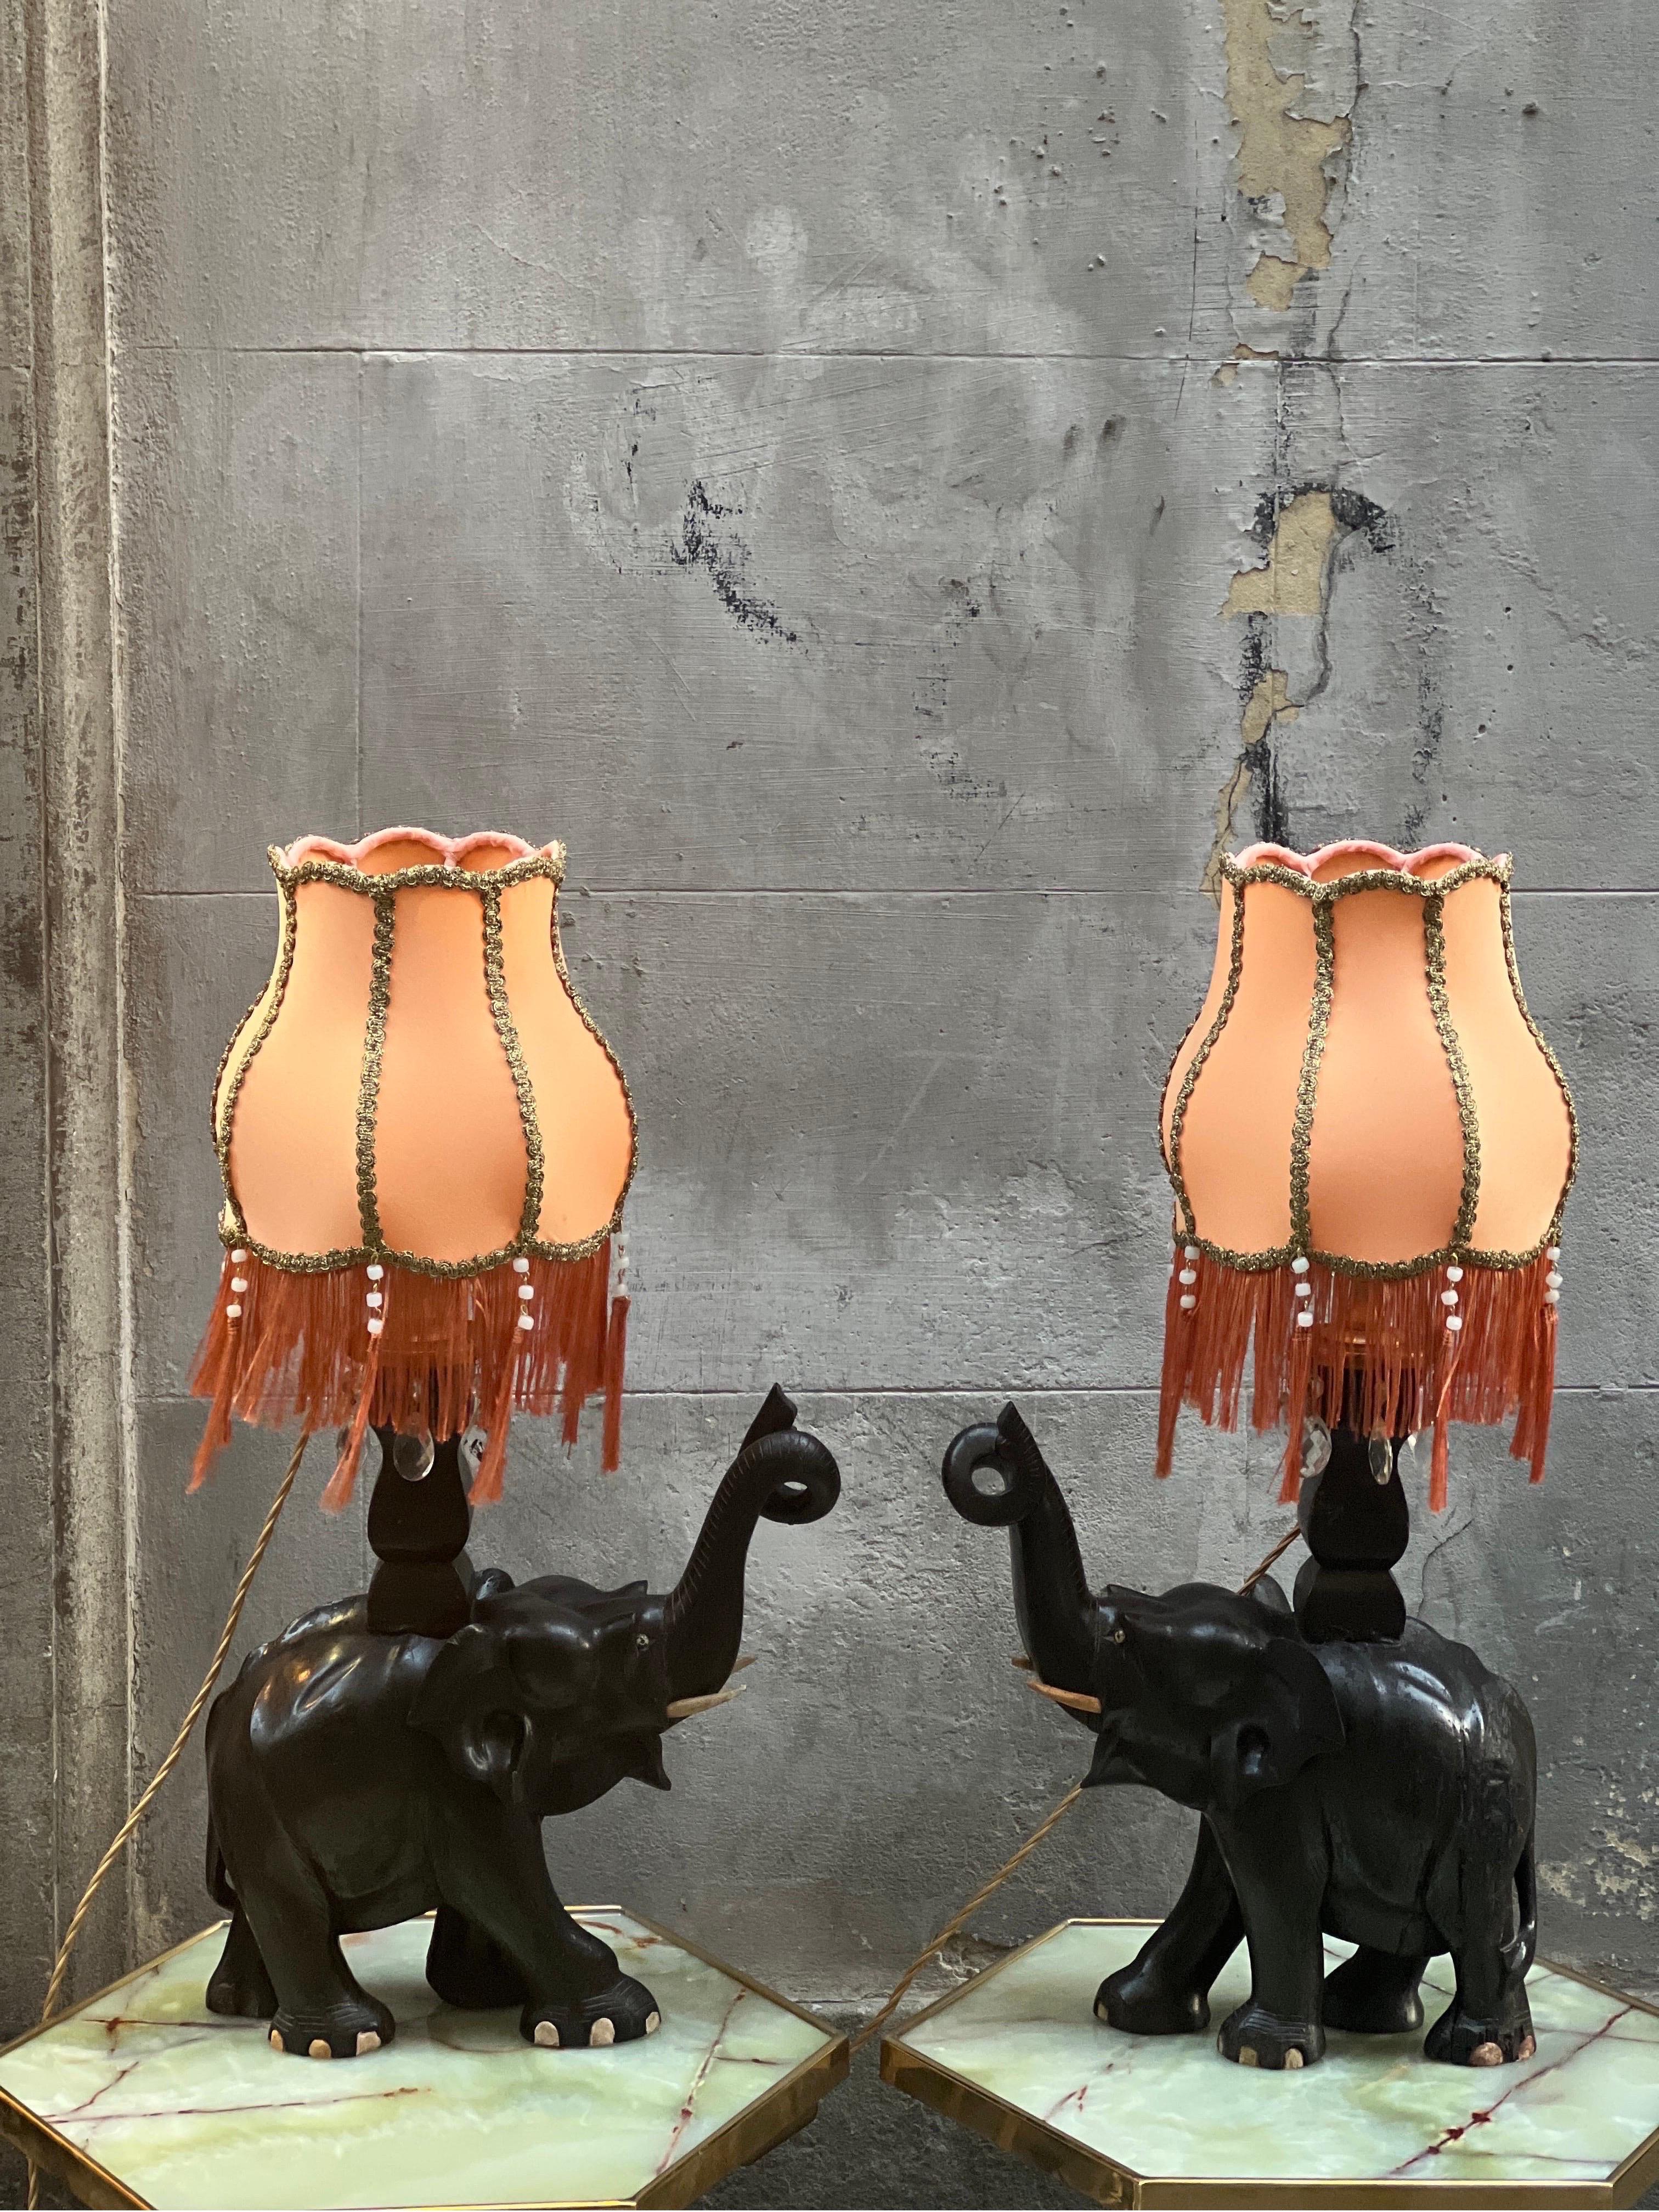 Pair of Ebony Elephants Table Lamps with Orange Lampshades and Fringes, 1920s 2